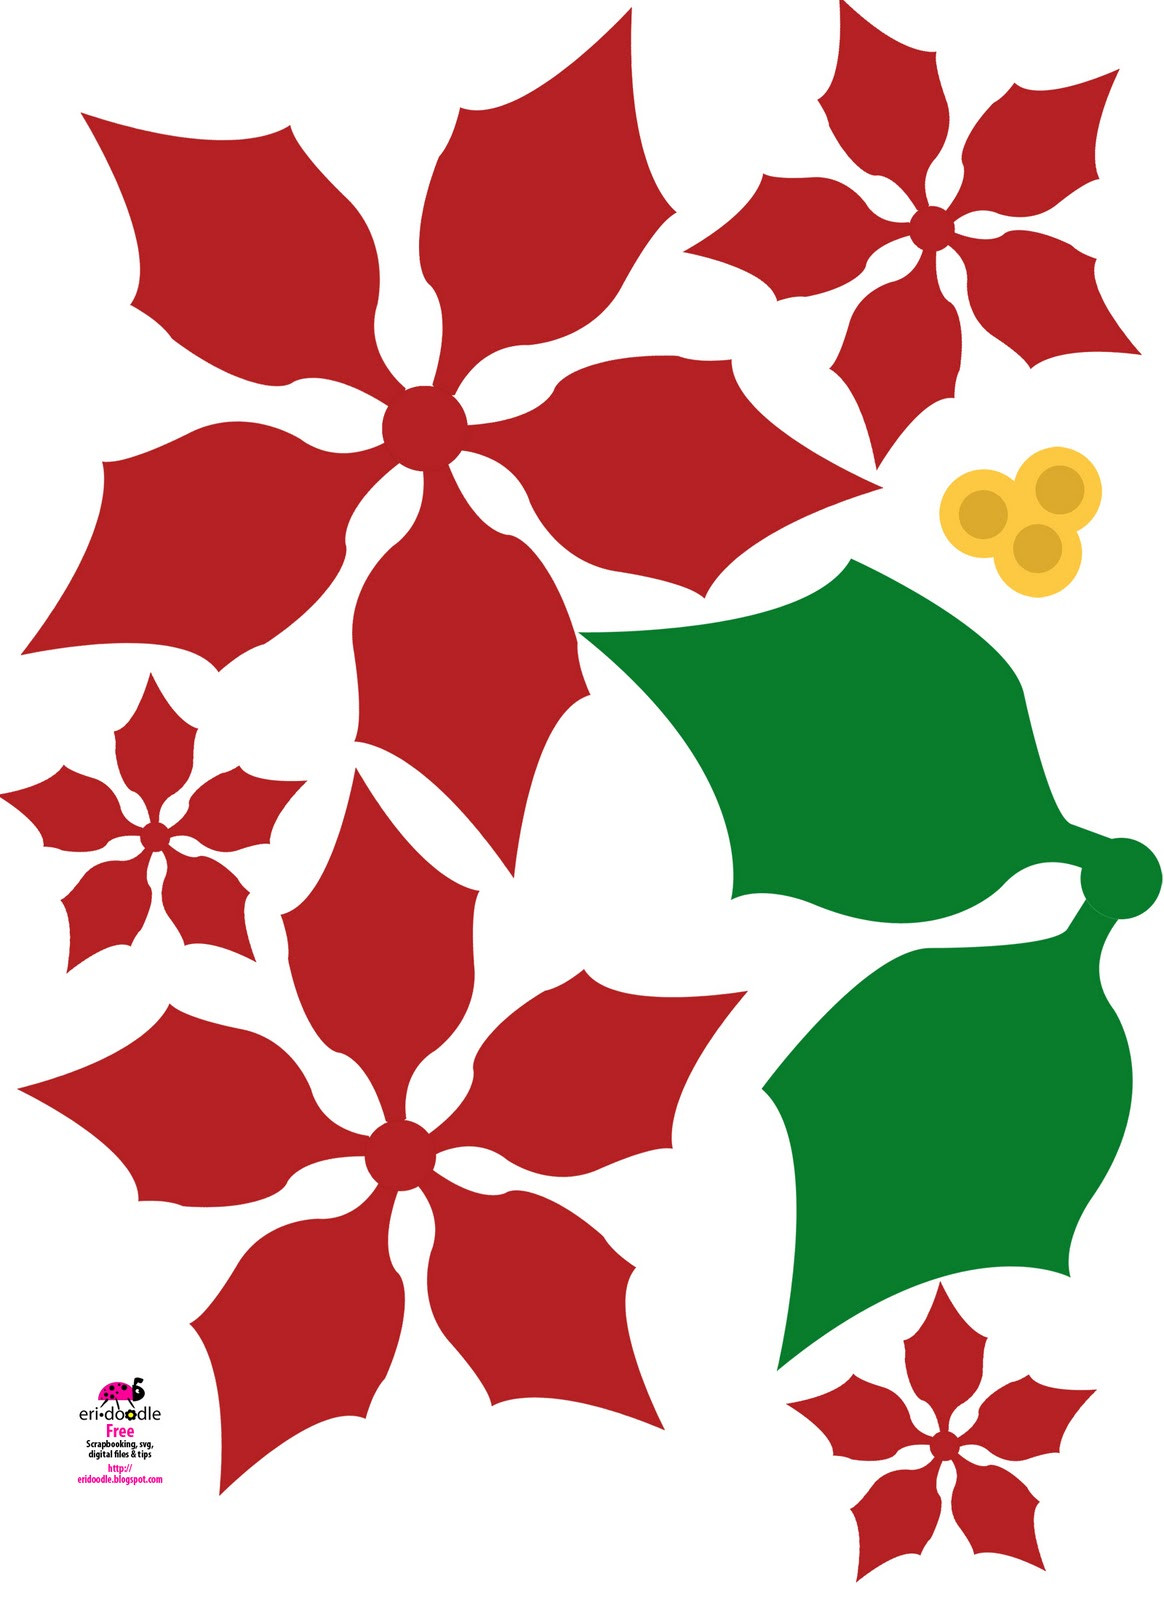 Poinsettia Christmas Flower
 eridoodle designs and creations Make a paper Christmas Flower